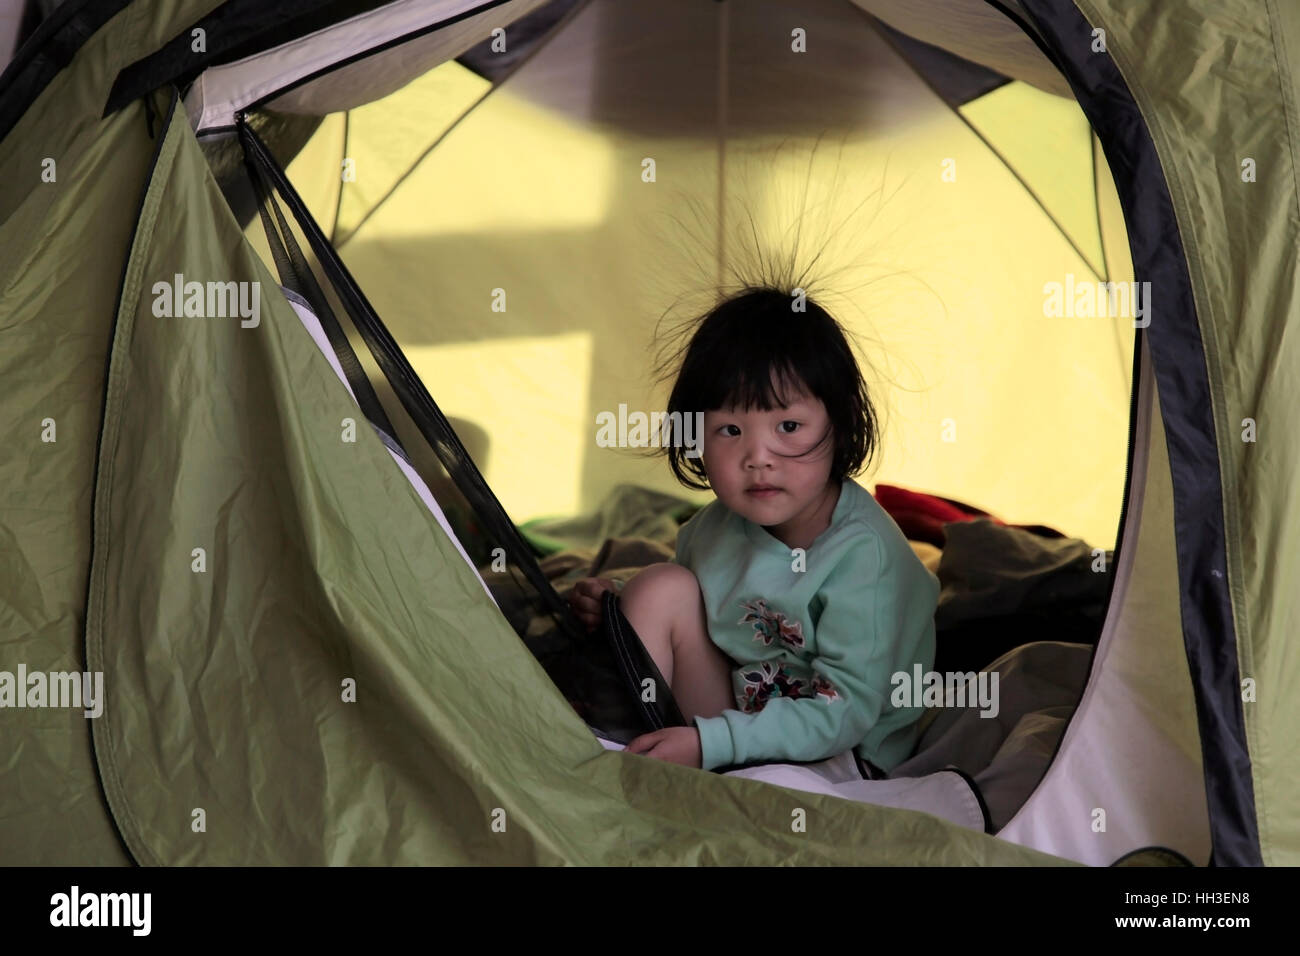 A Chinese little girl with some hair standing due to static electricity plays in a tent during a family camping trip in China. Stock Photo